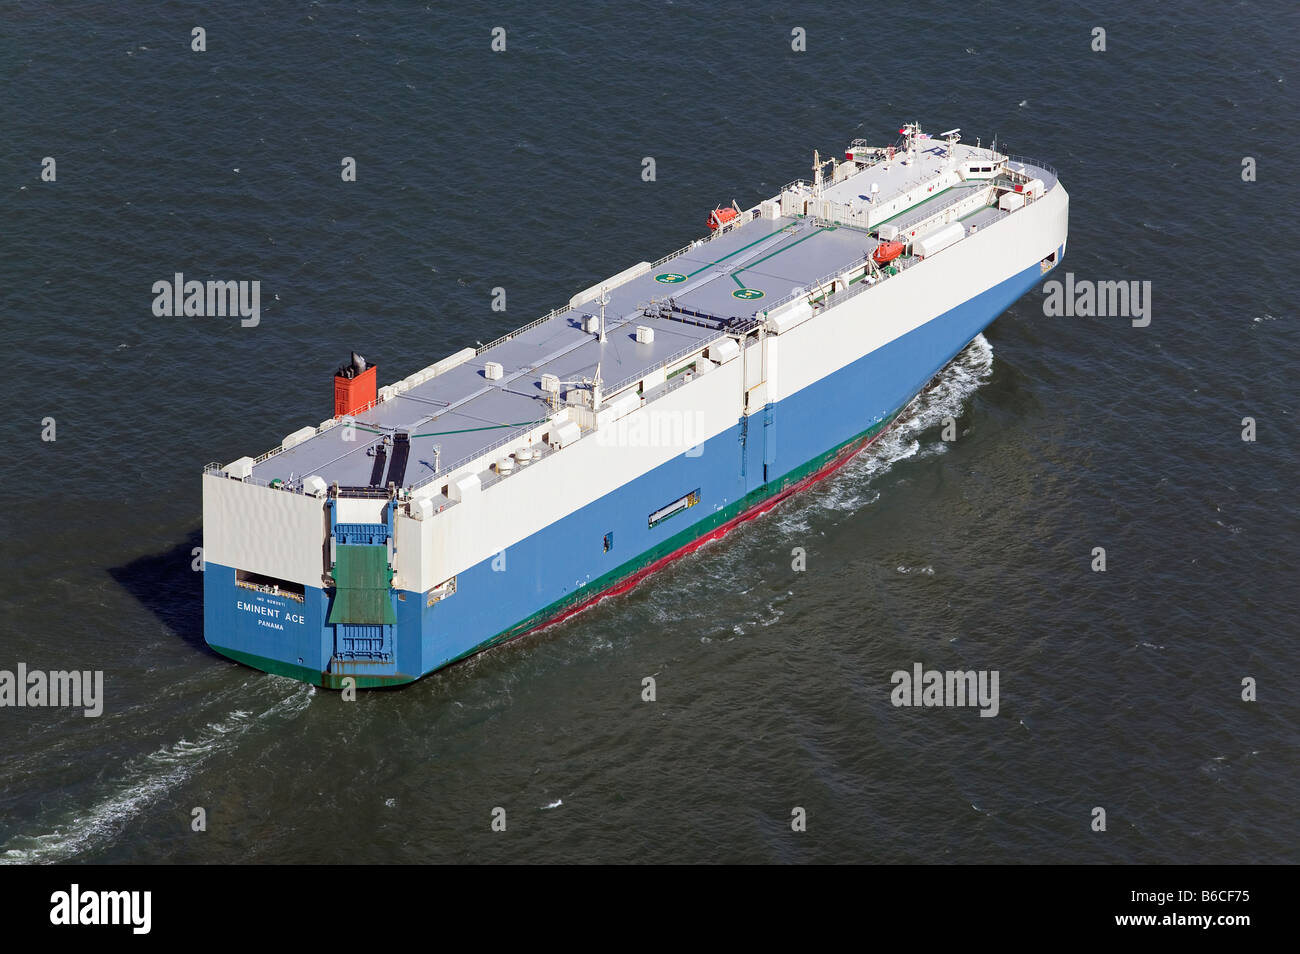 aerial view above Eminent Ace Panama registered automobile vehicle carrier merchant ship built by Mitsubishi Stock Photo